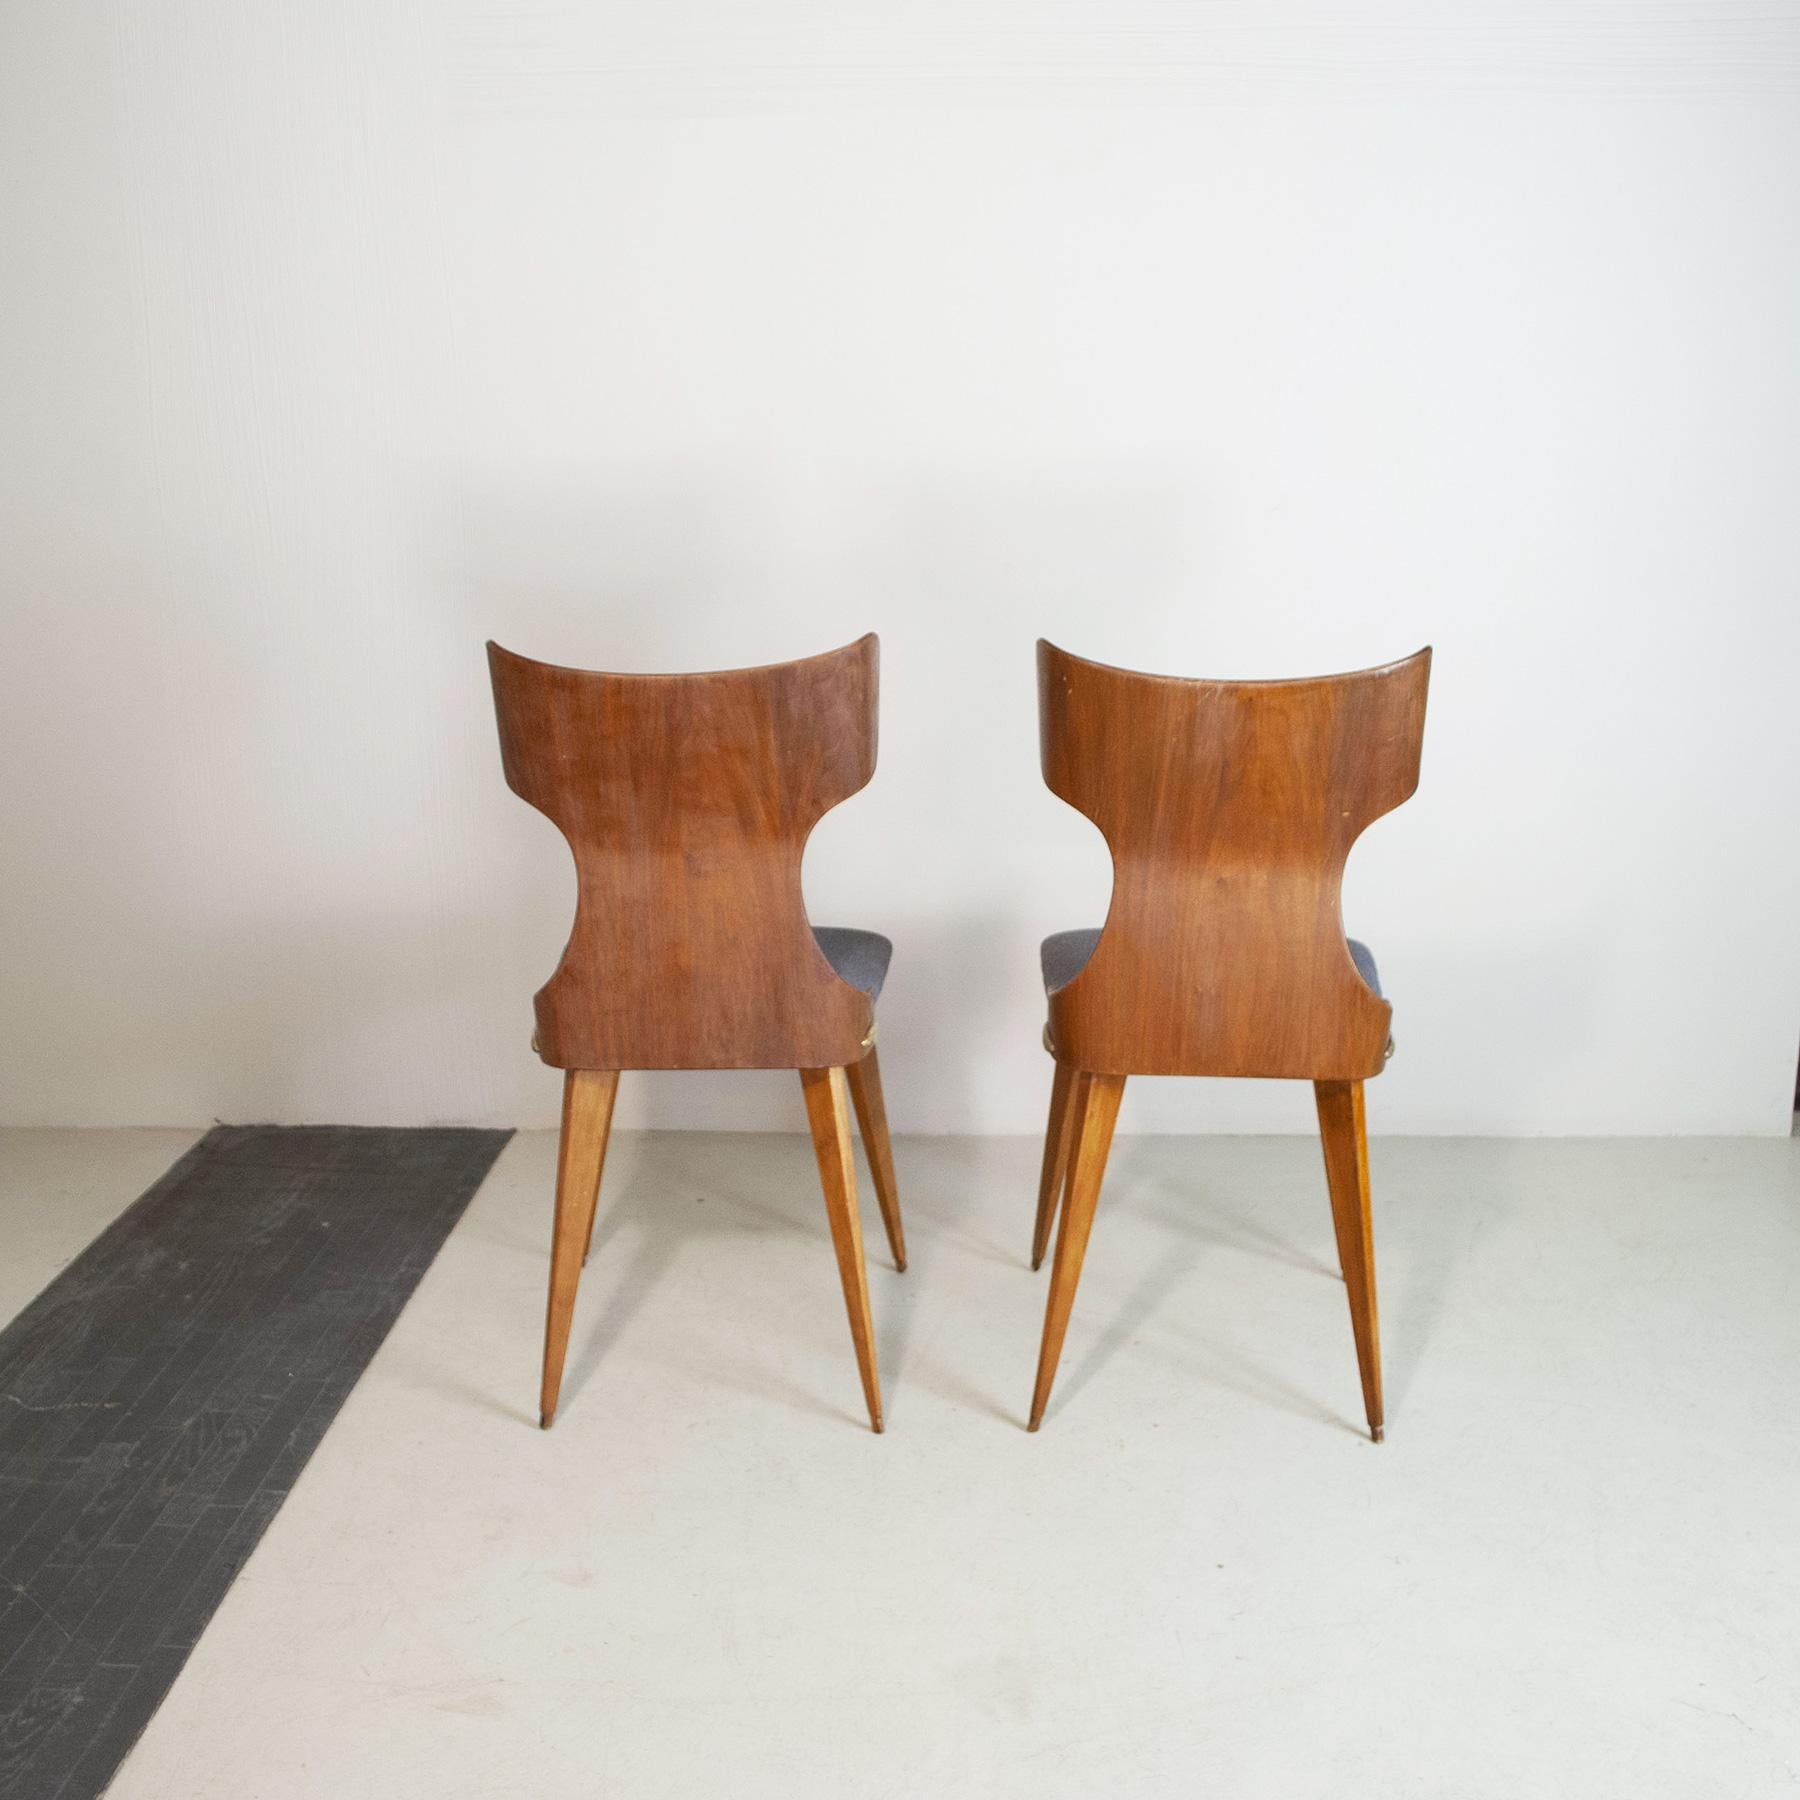 Mid-20th Century Carlo Ratti Italian Midcentury Chairs Form the Fifties For Sale